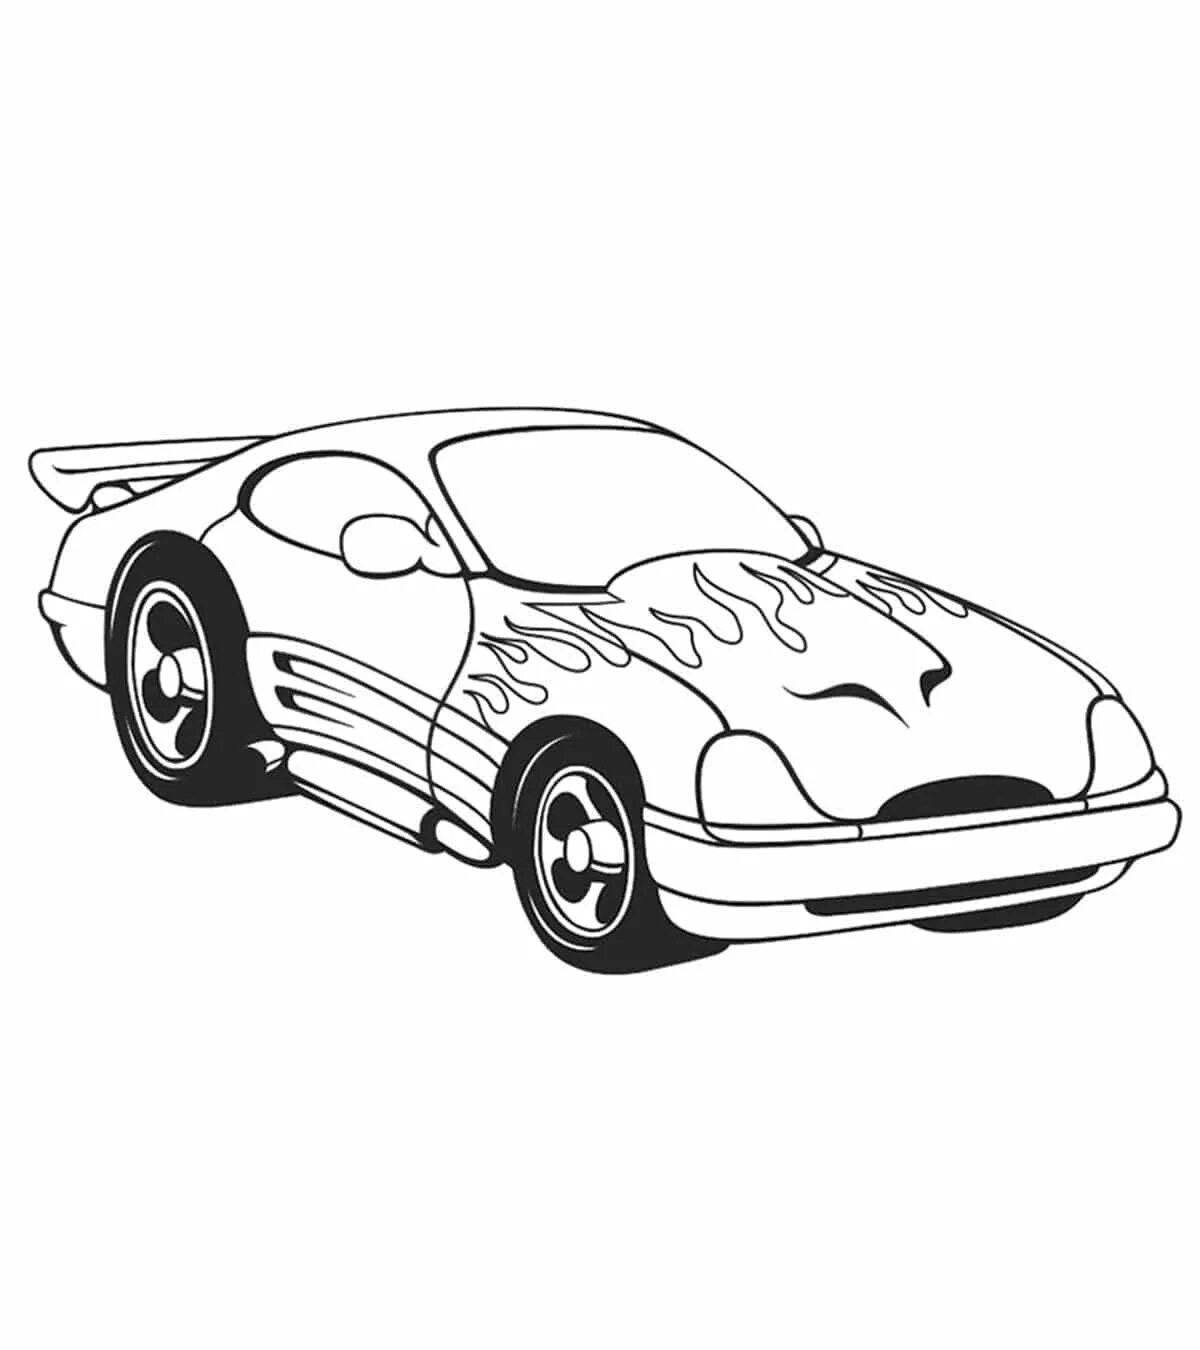 Exquisite speed car coloring page